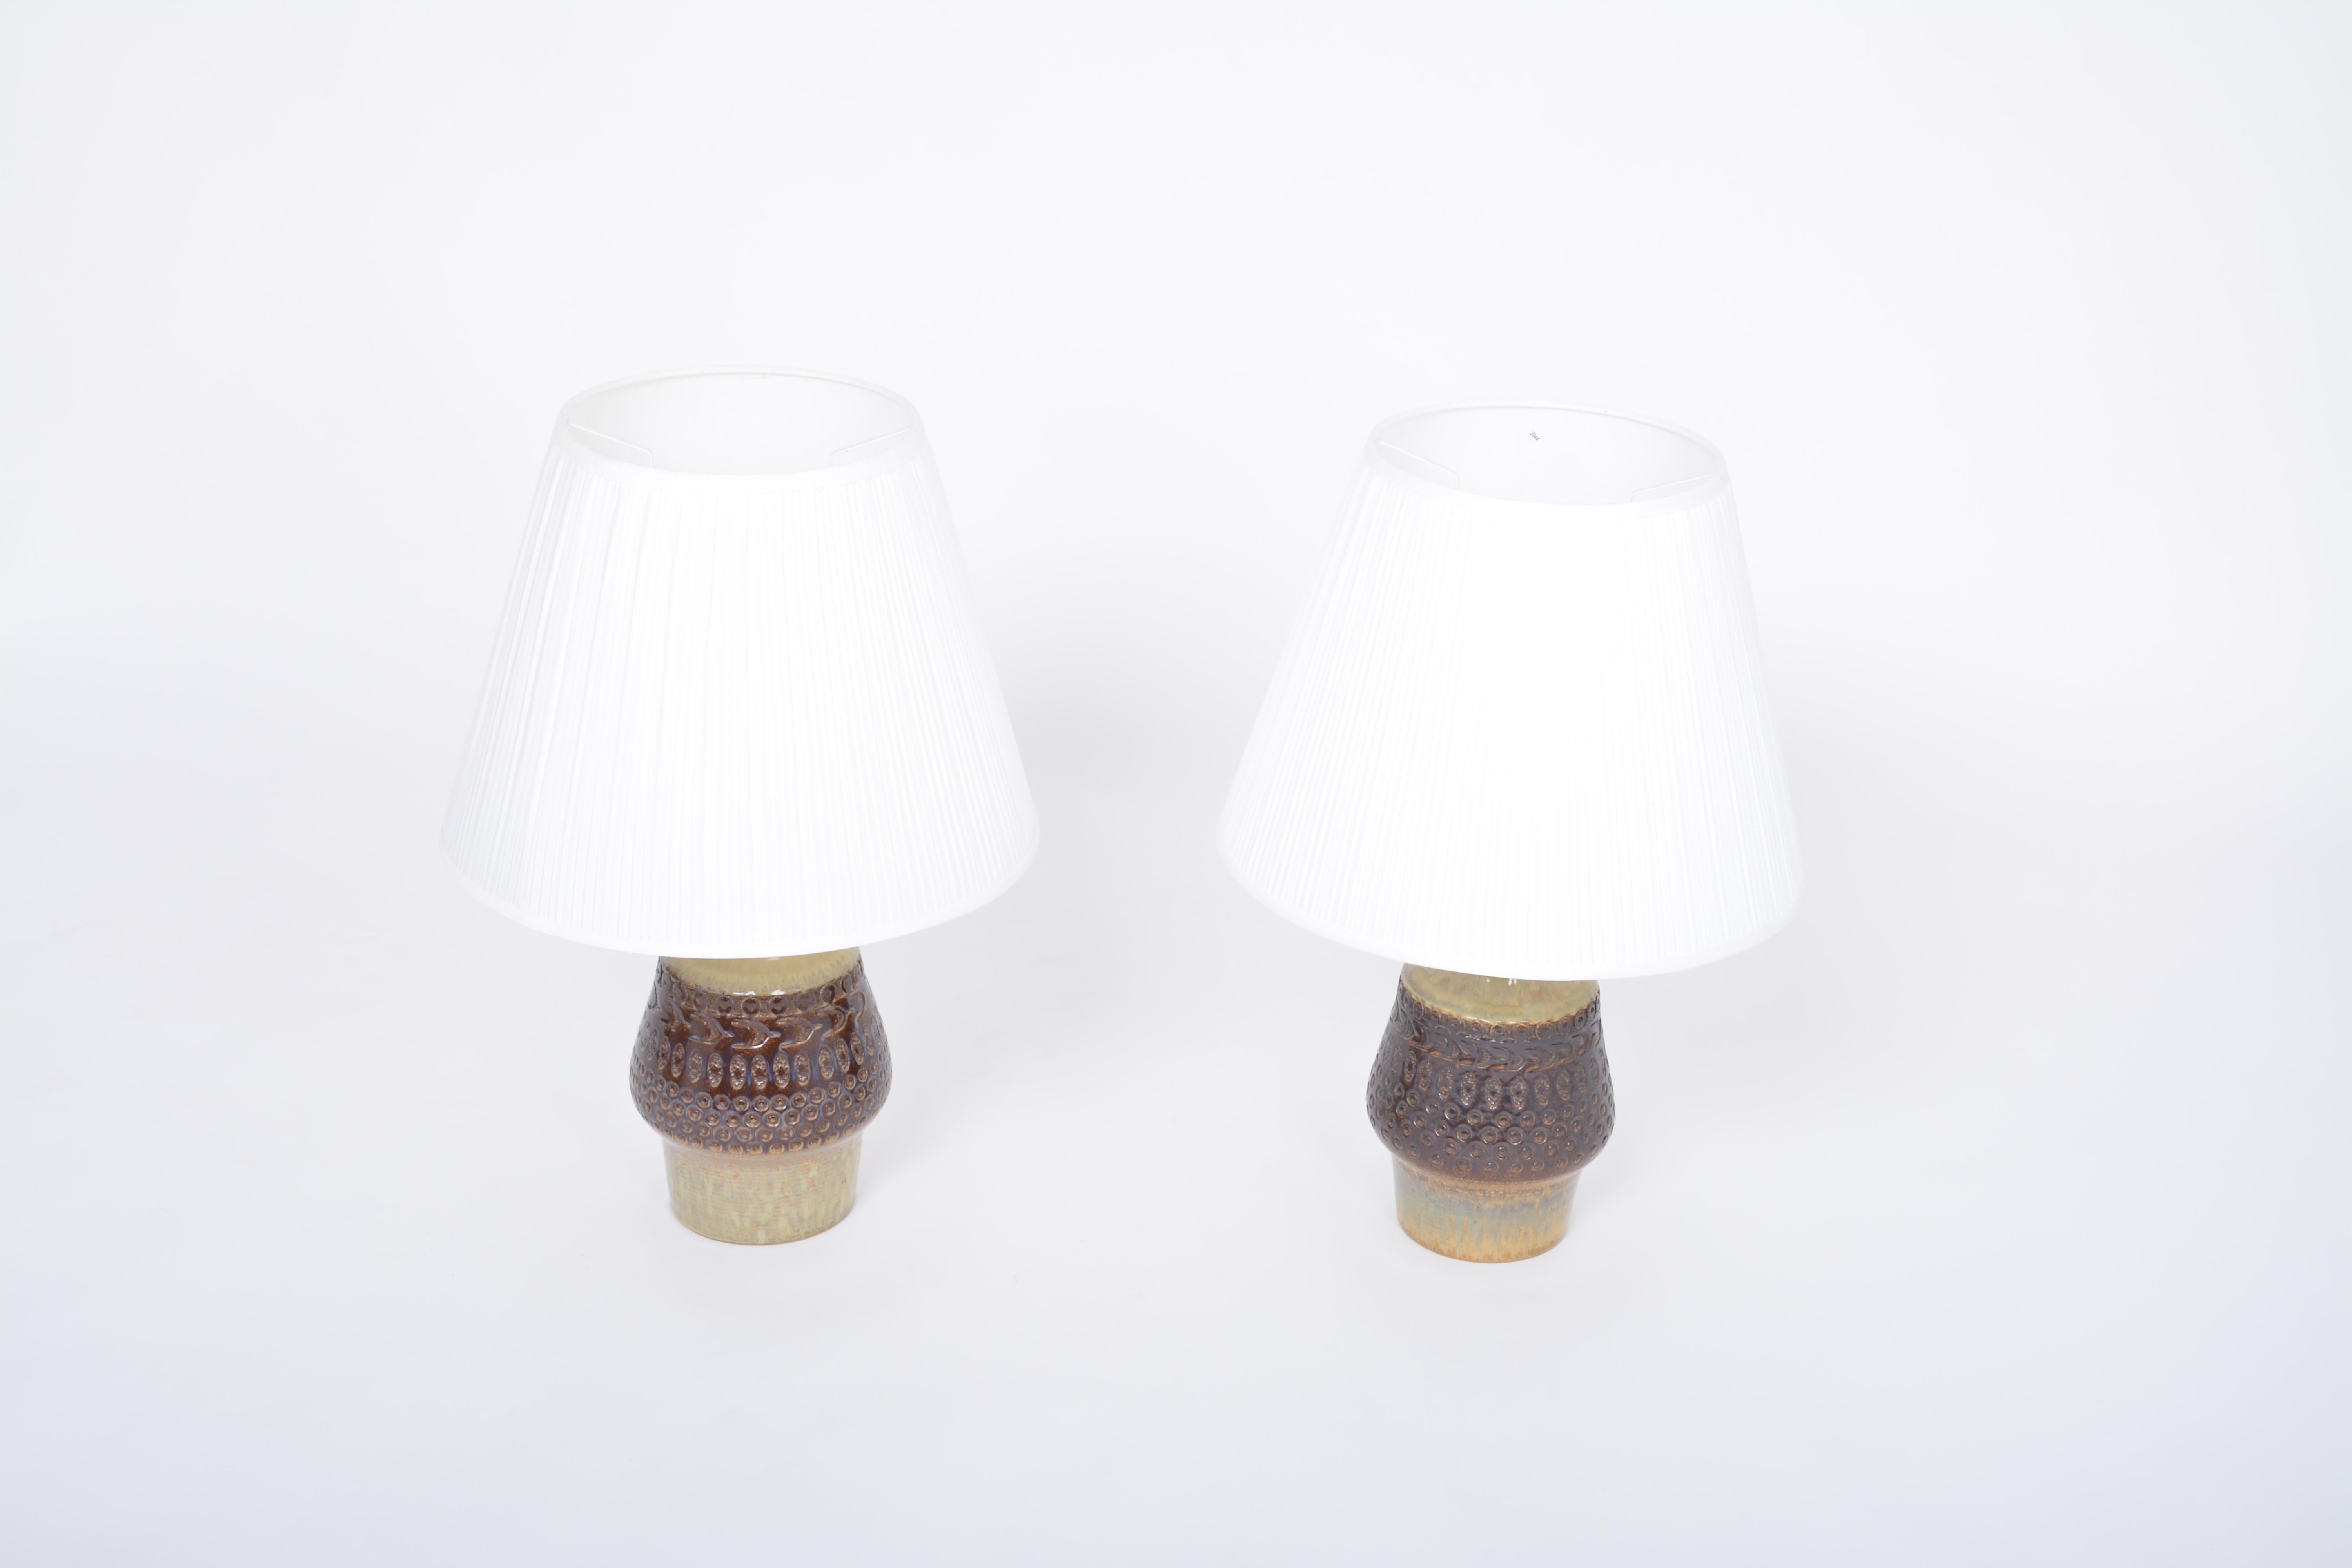 Pair of Handmade Mid-Century Modern Danish Stoneware Table lamps model 3029 by Soholm.

Spectacular pair of tall table lamps made of stoneware with ceramic glazing in various tones of brown and yellow. The base of the lamp features various graphic